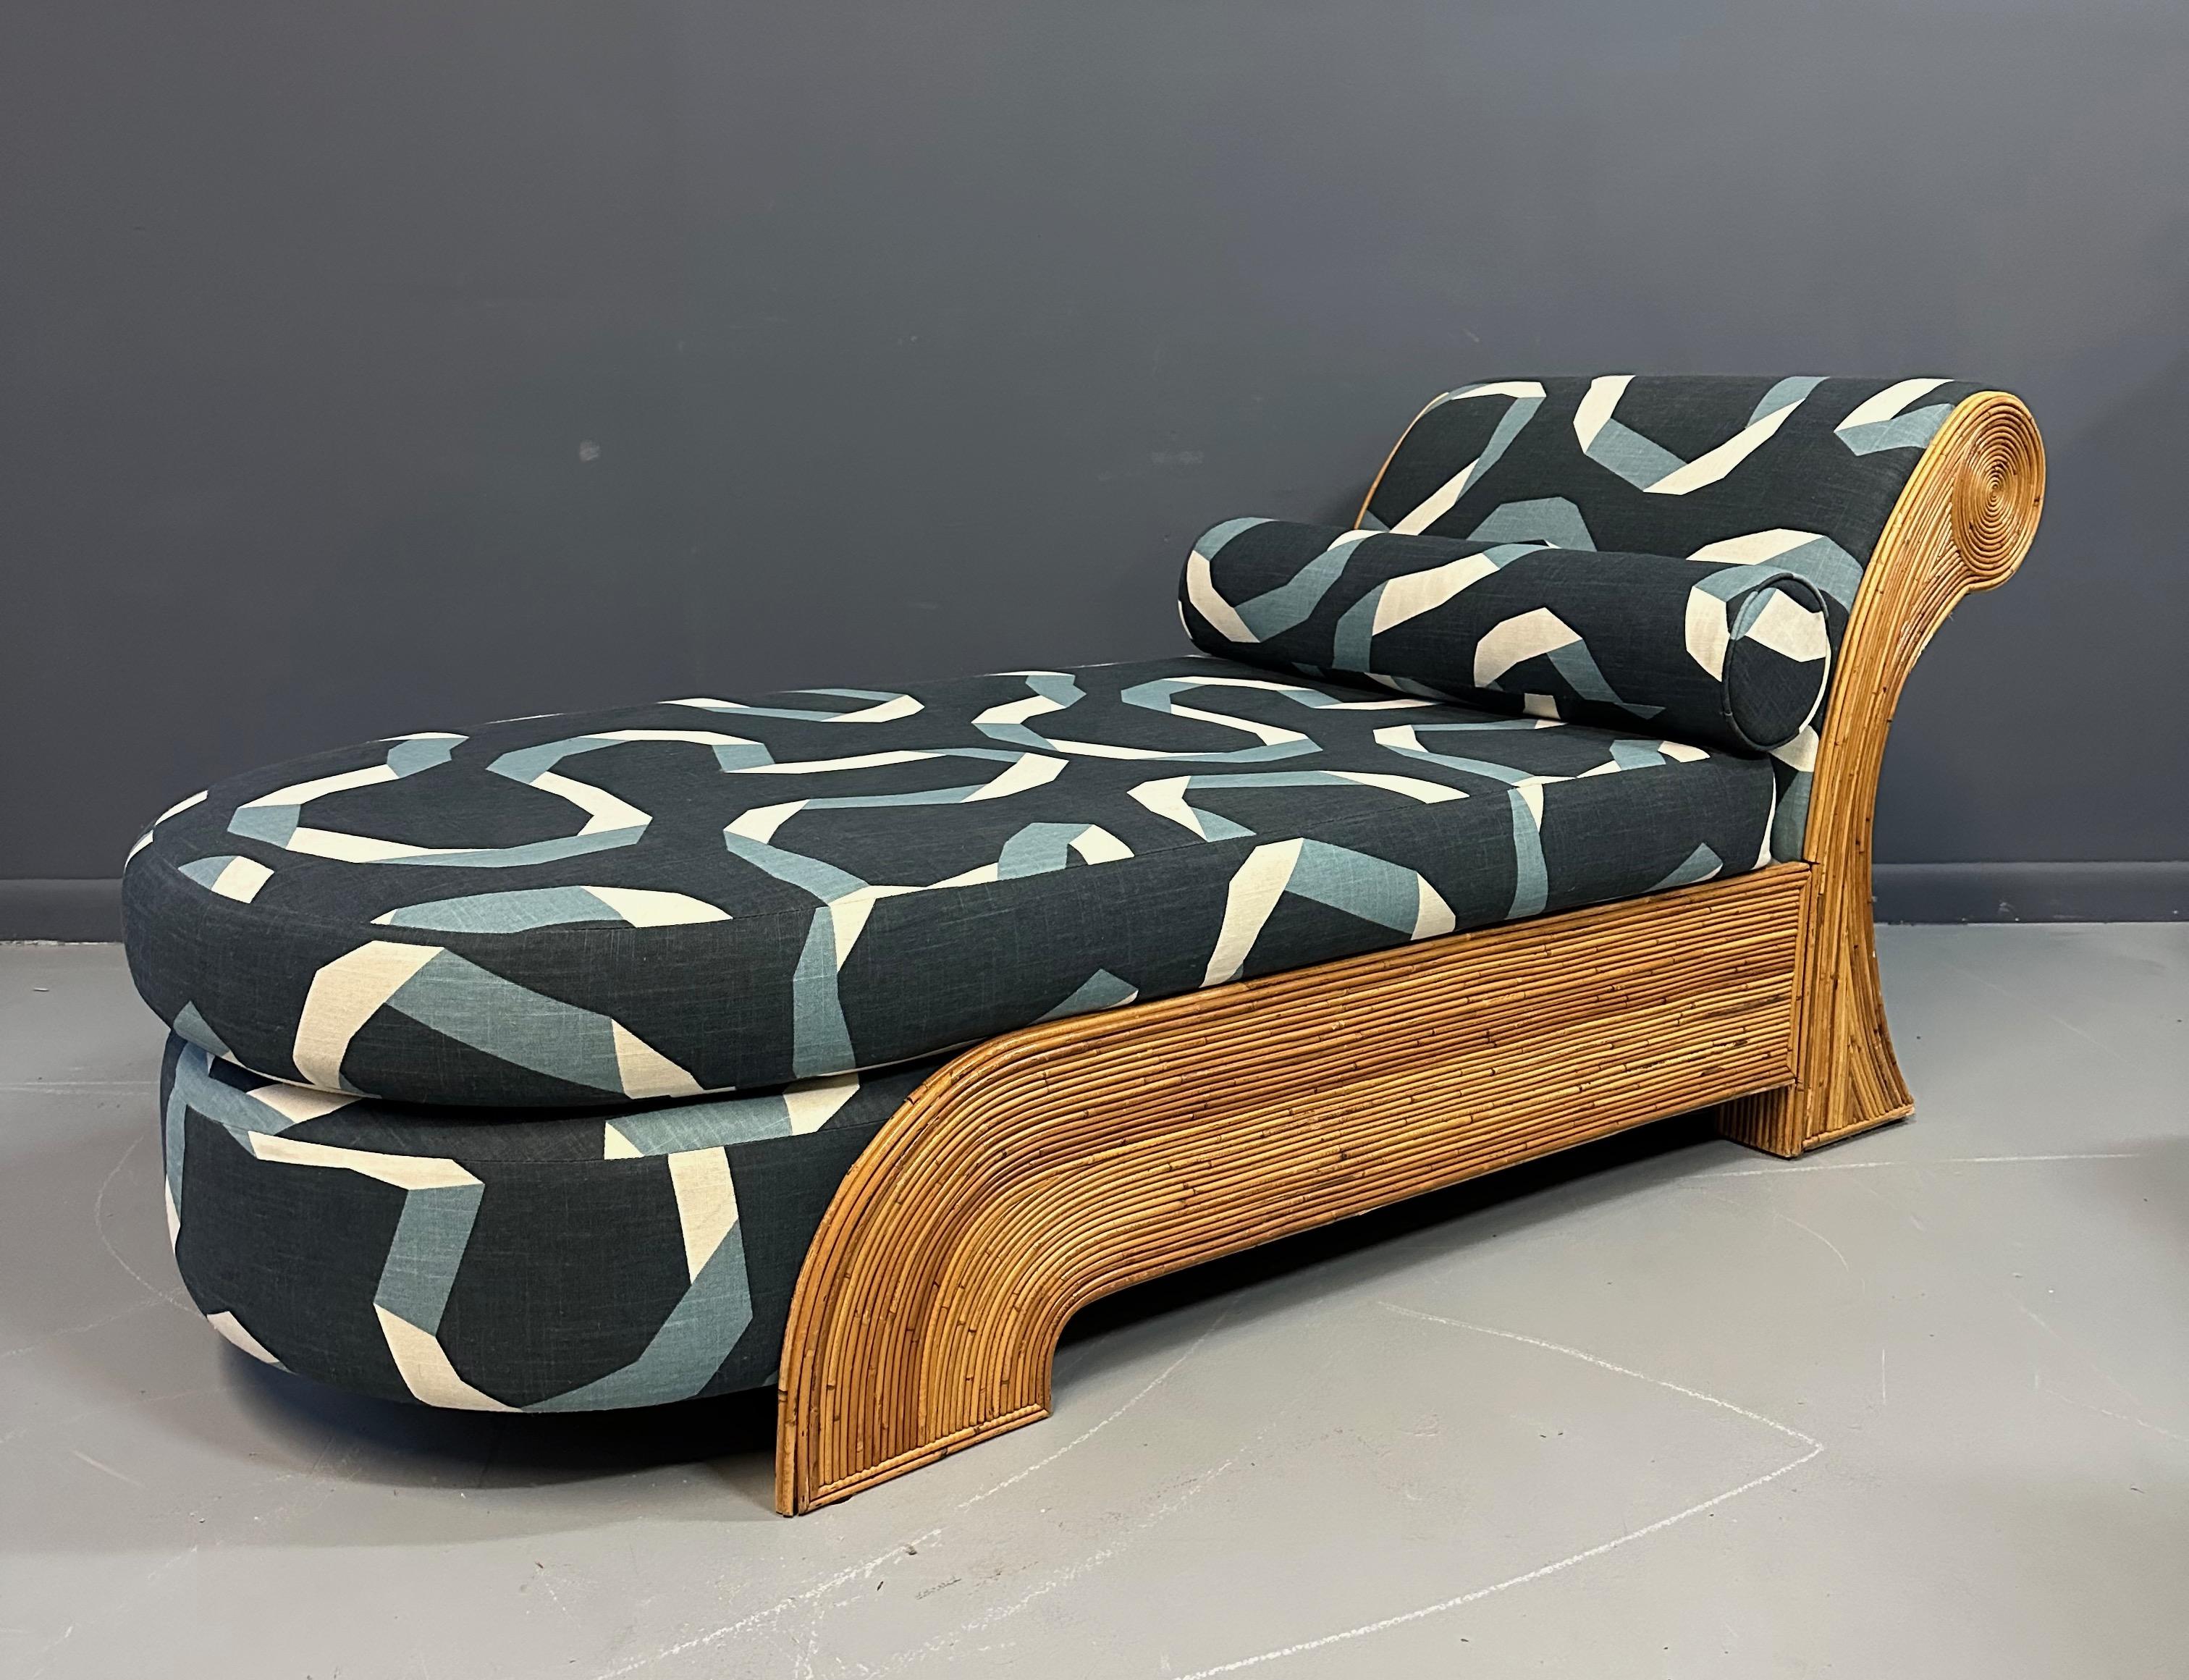 Stunning chaise lounge ready to be loved for decades to come! Elegant design and a style that is Classic and will be so forever. Excellent condition with no breaks for damage to the rattan. Fabric is in excellent condition with no rips or tears.